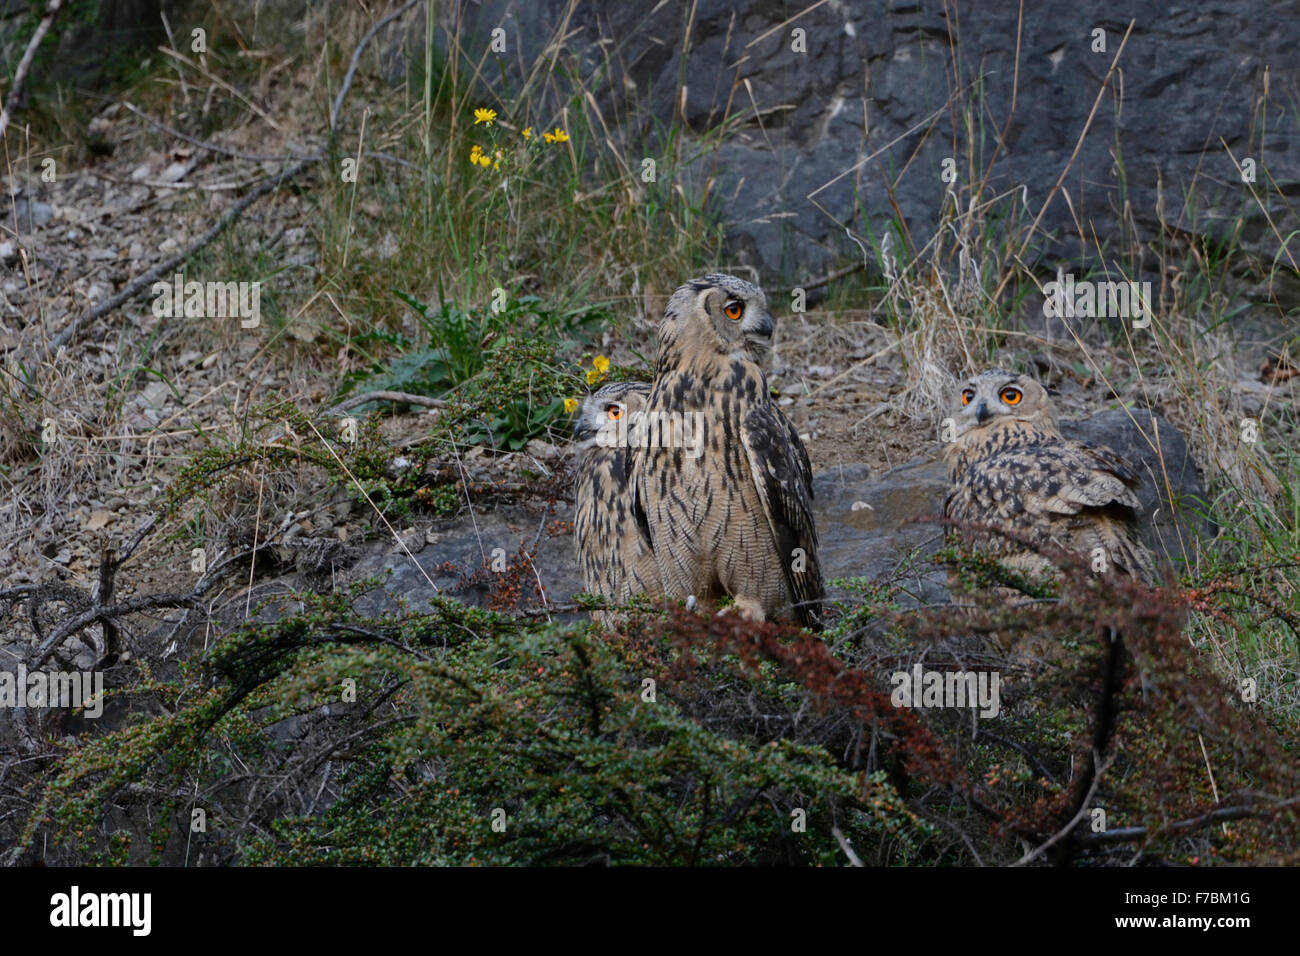 Three young Northern Eagle Owls / Europaeische Uhus ( Bubo bubo ) sitting next to each other on rocks of an old quarry, wildlife Stock Photo